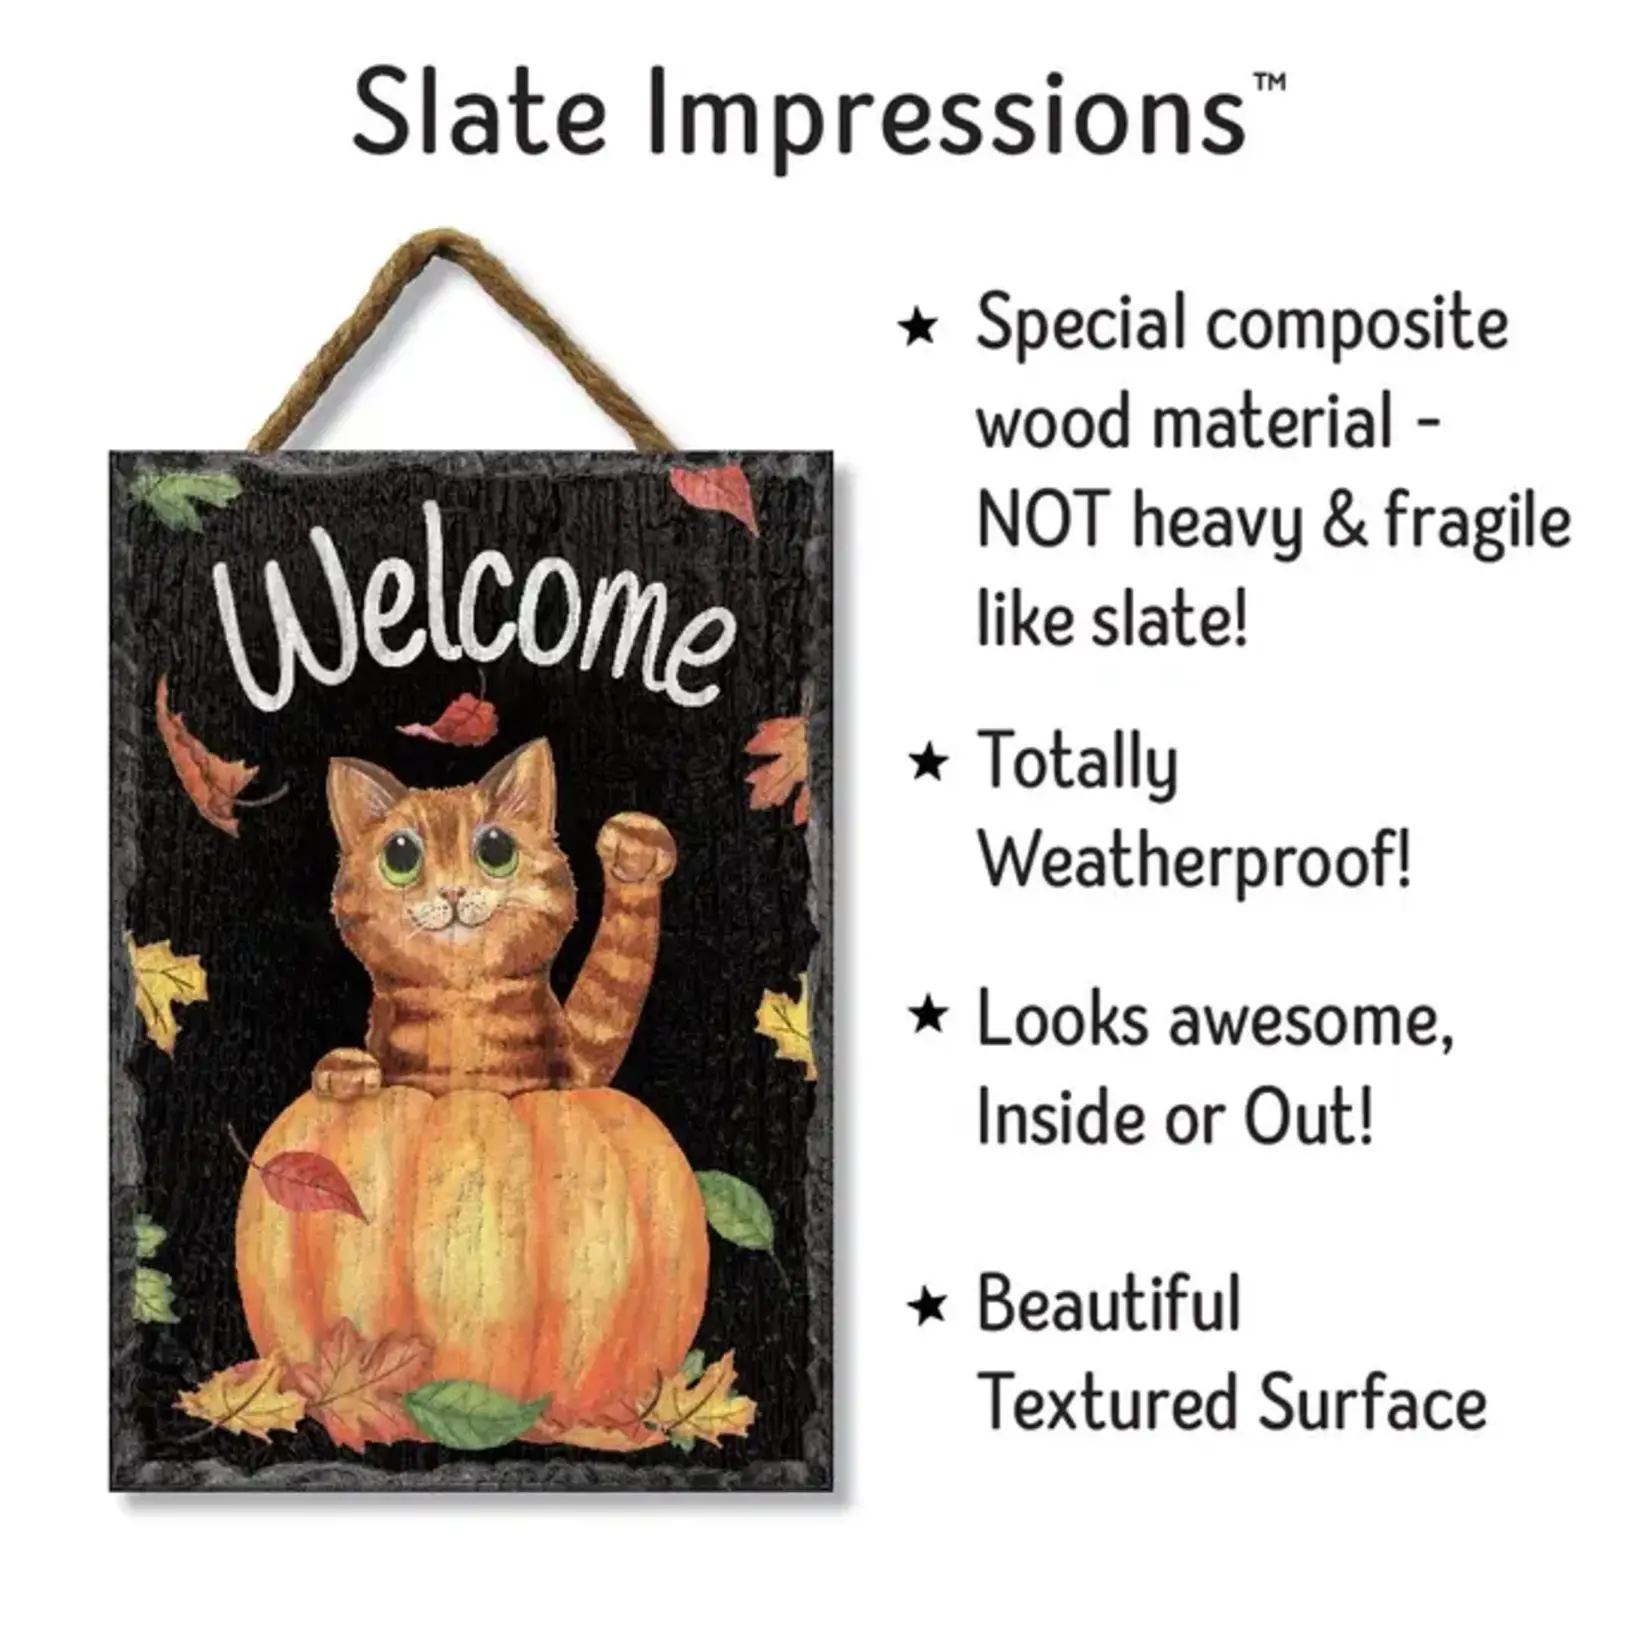 Welcome with Cat in Pumpkin - Slate Impressions